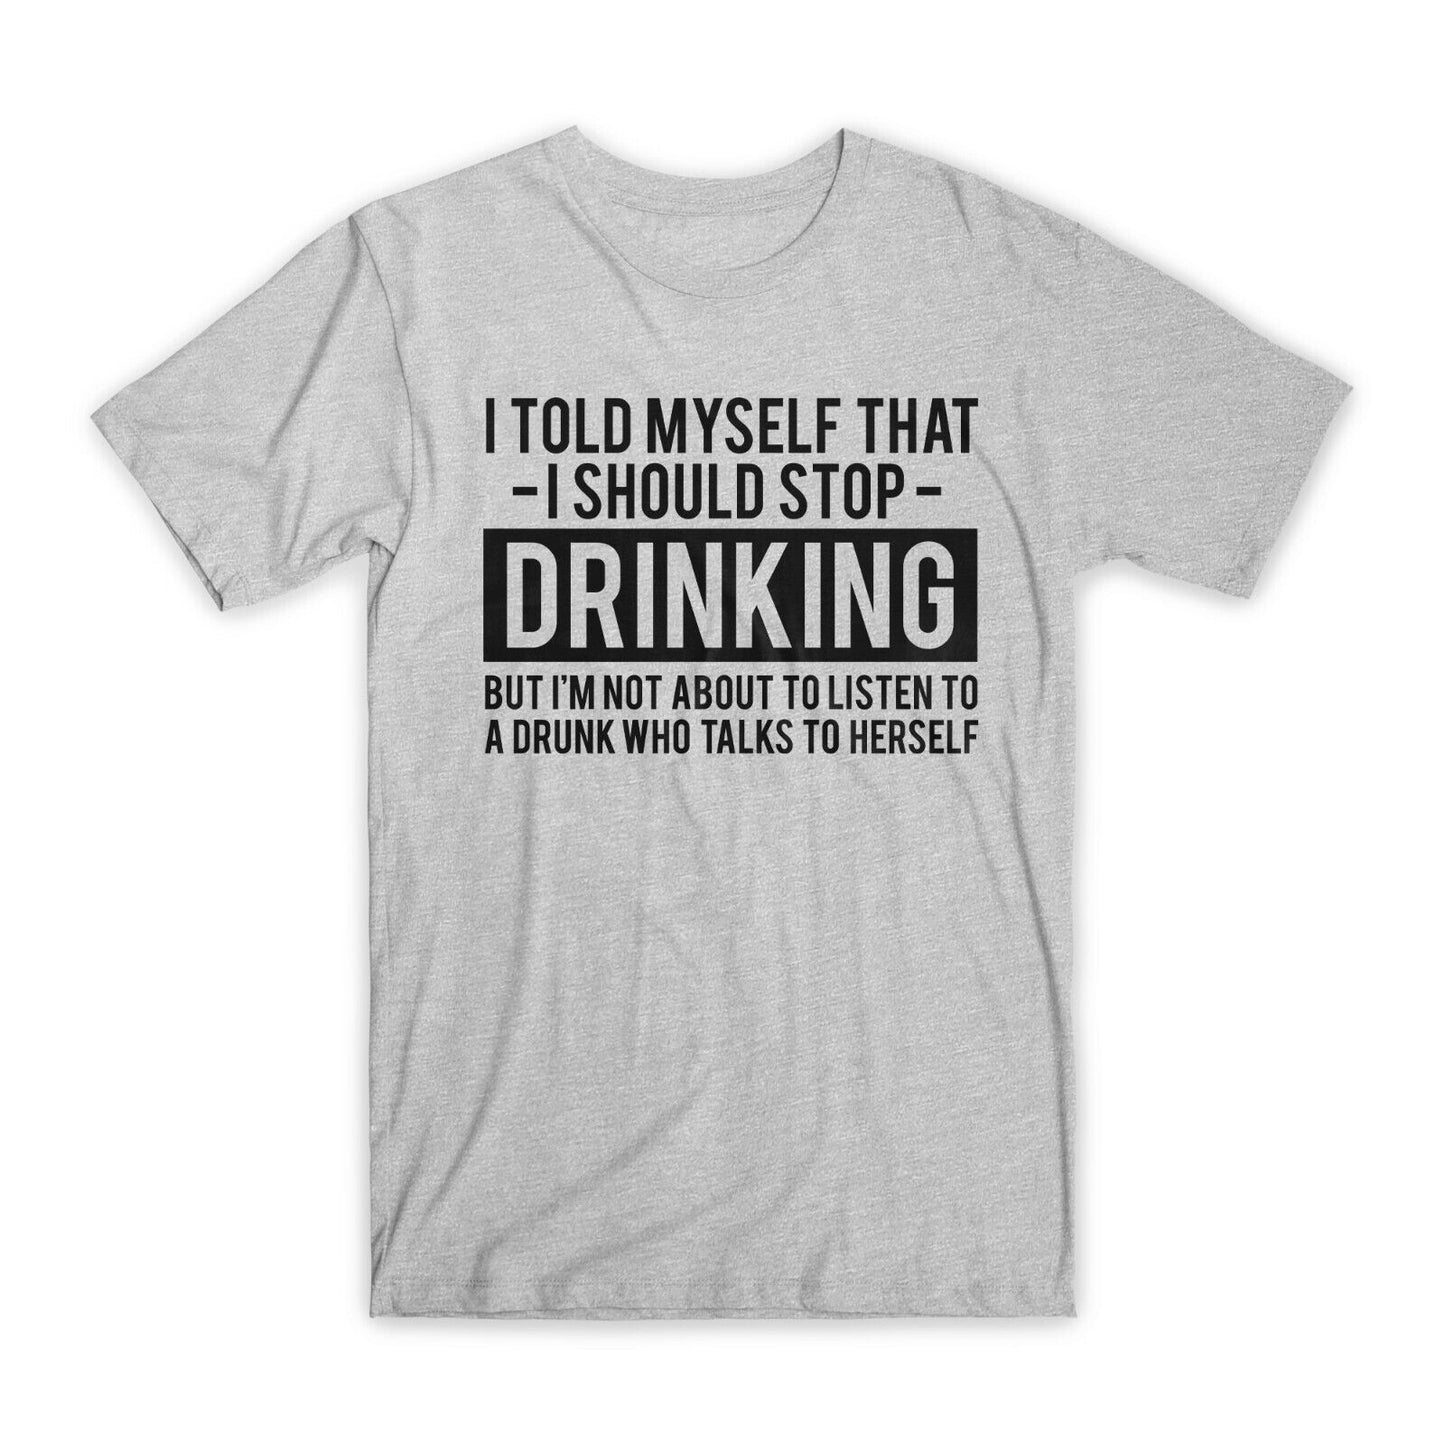 I Told Myself That I Should Stop Drinking T-Shirt Premium Cotton Funny Tees NEW